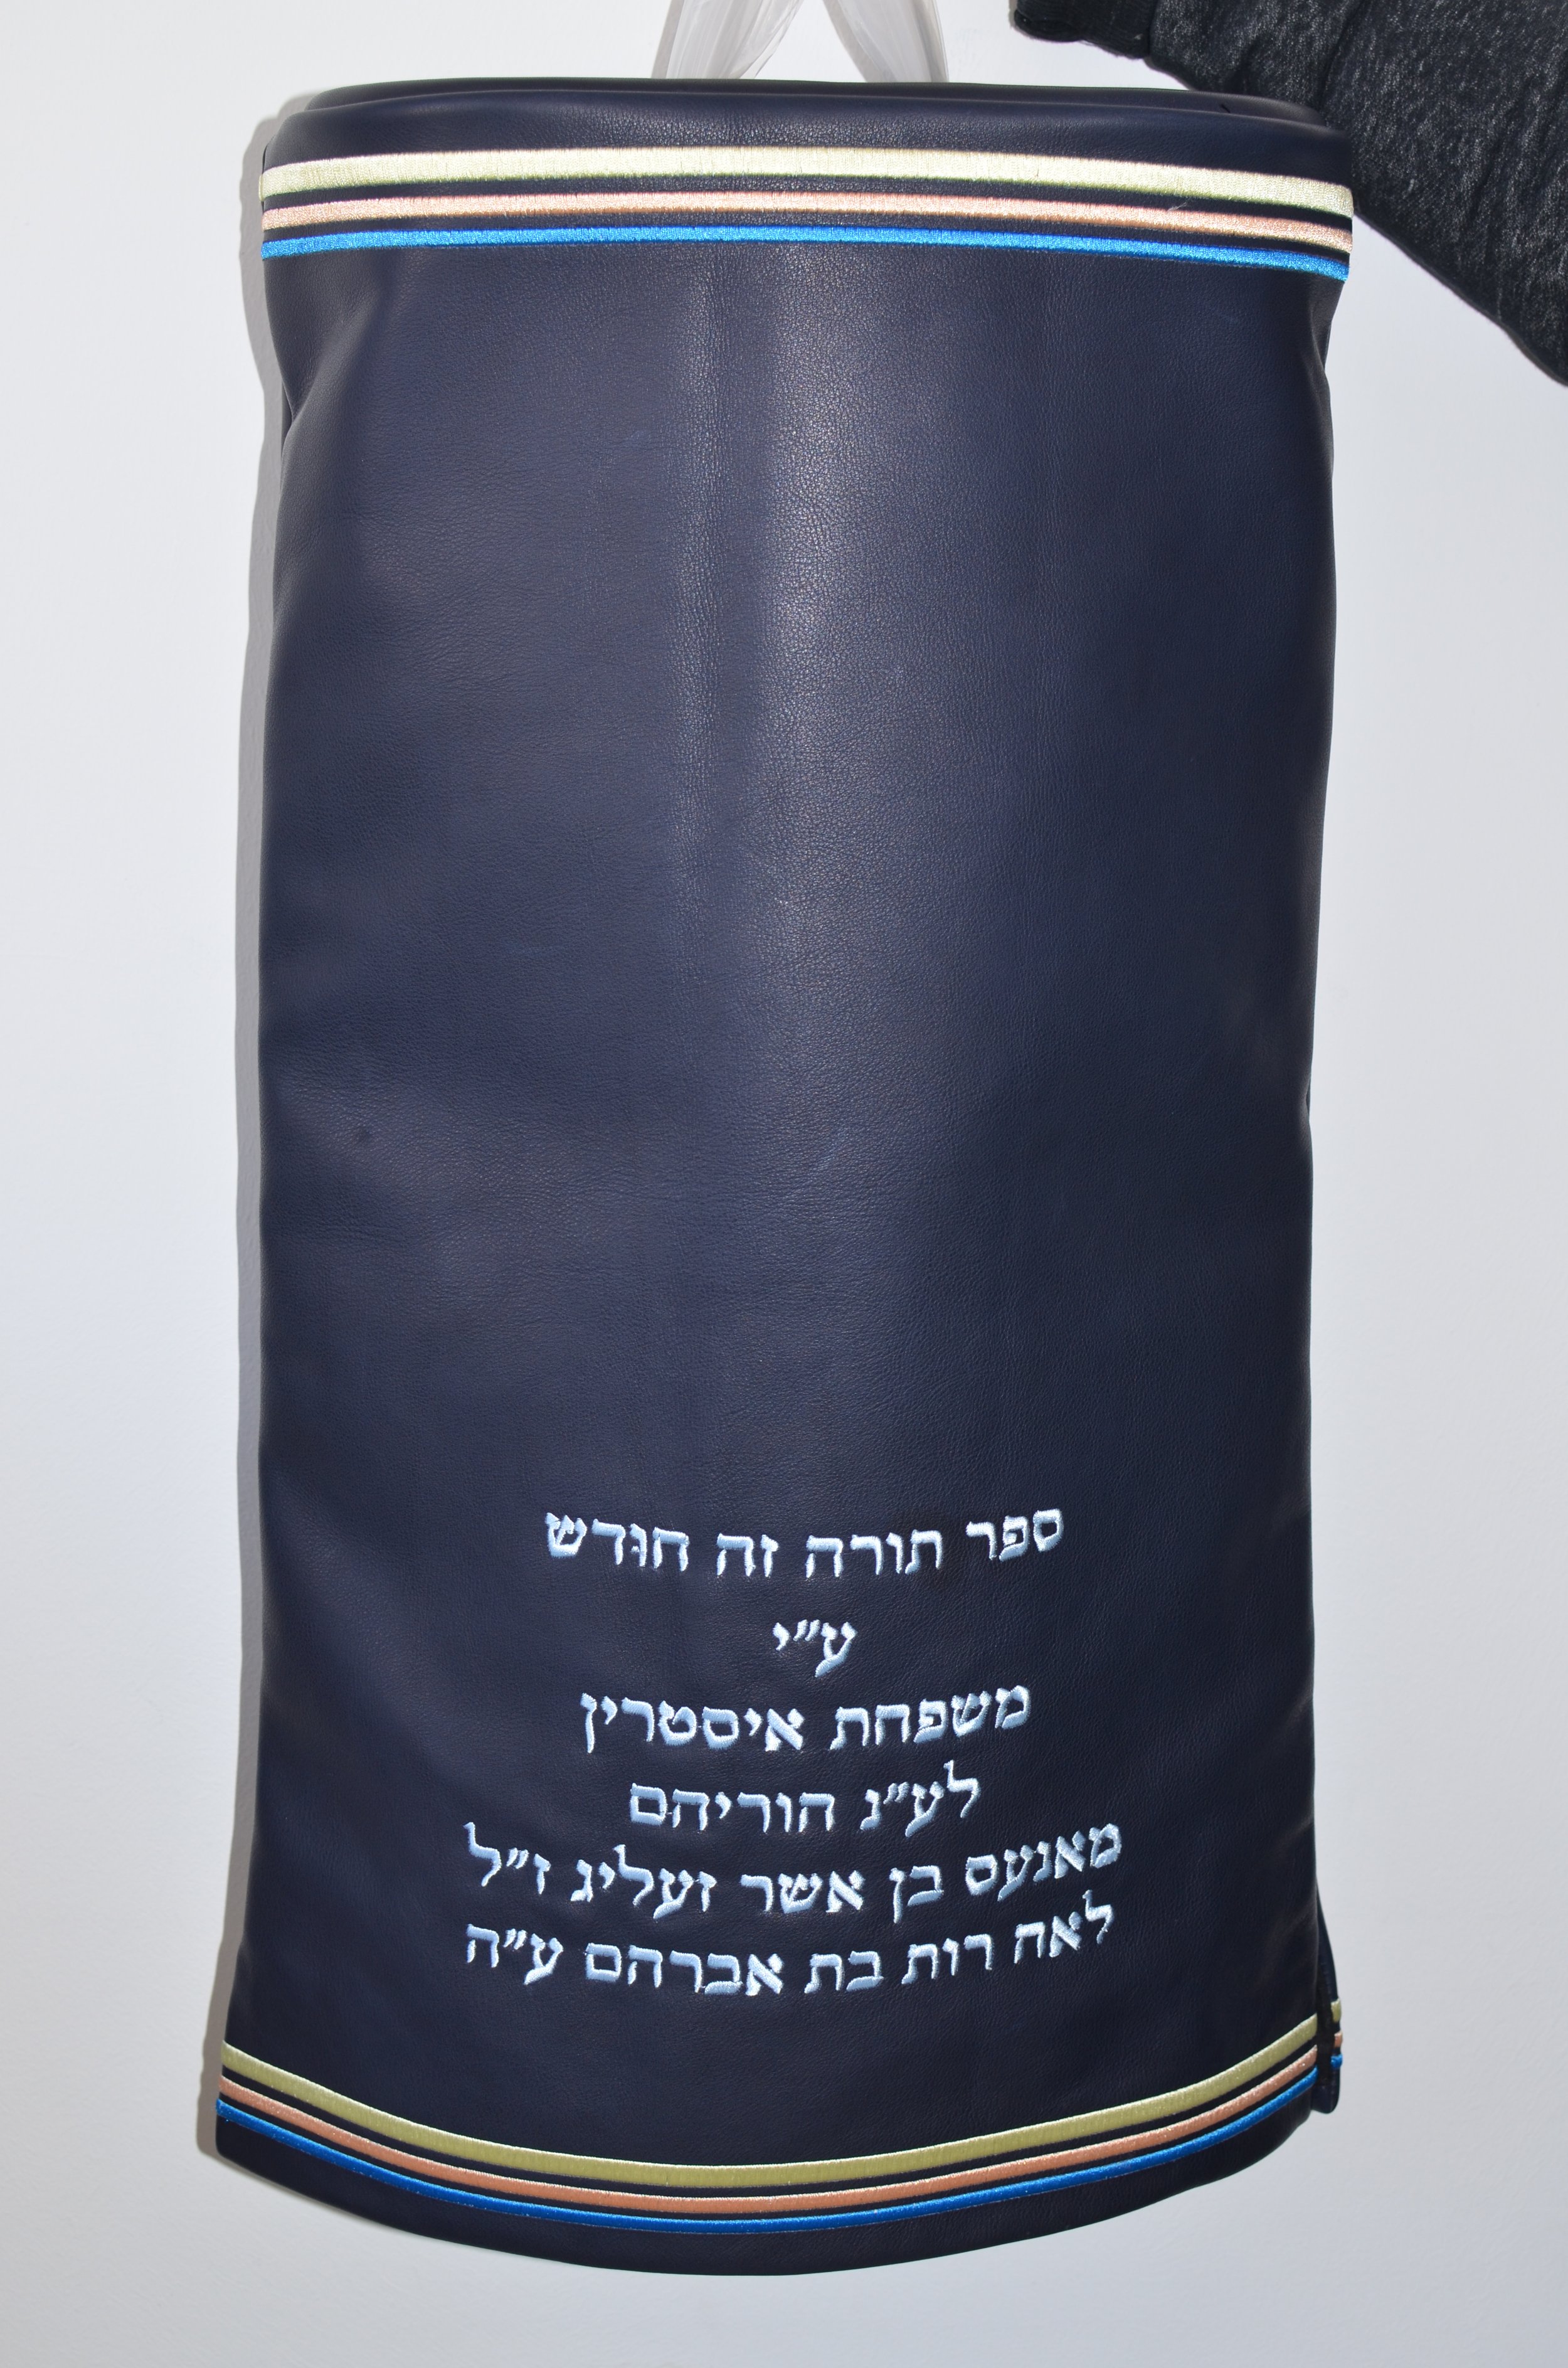  The dedication on Chana Gamliel's Torah Mantel is a work of artistry and devotion. Crafted with precision and care, the inscription exudes reverence and spirituality. Chana Gamliel's commitment to quality is evident in every detail, from the choice 